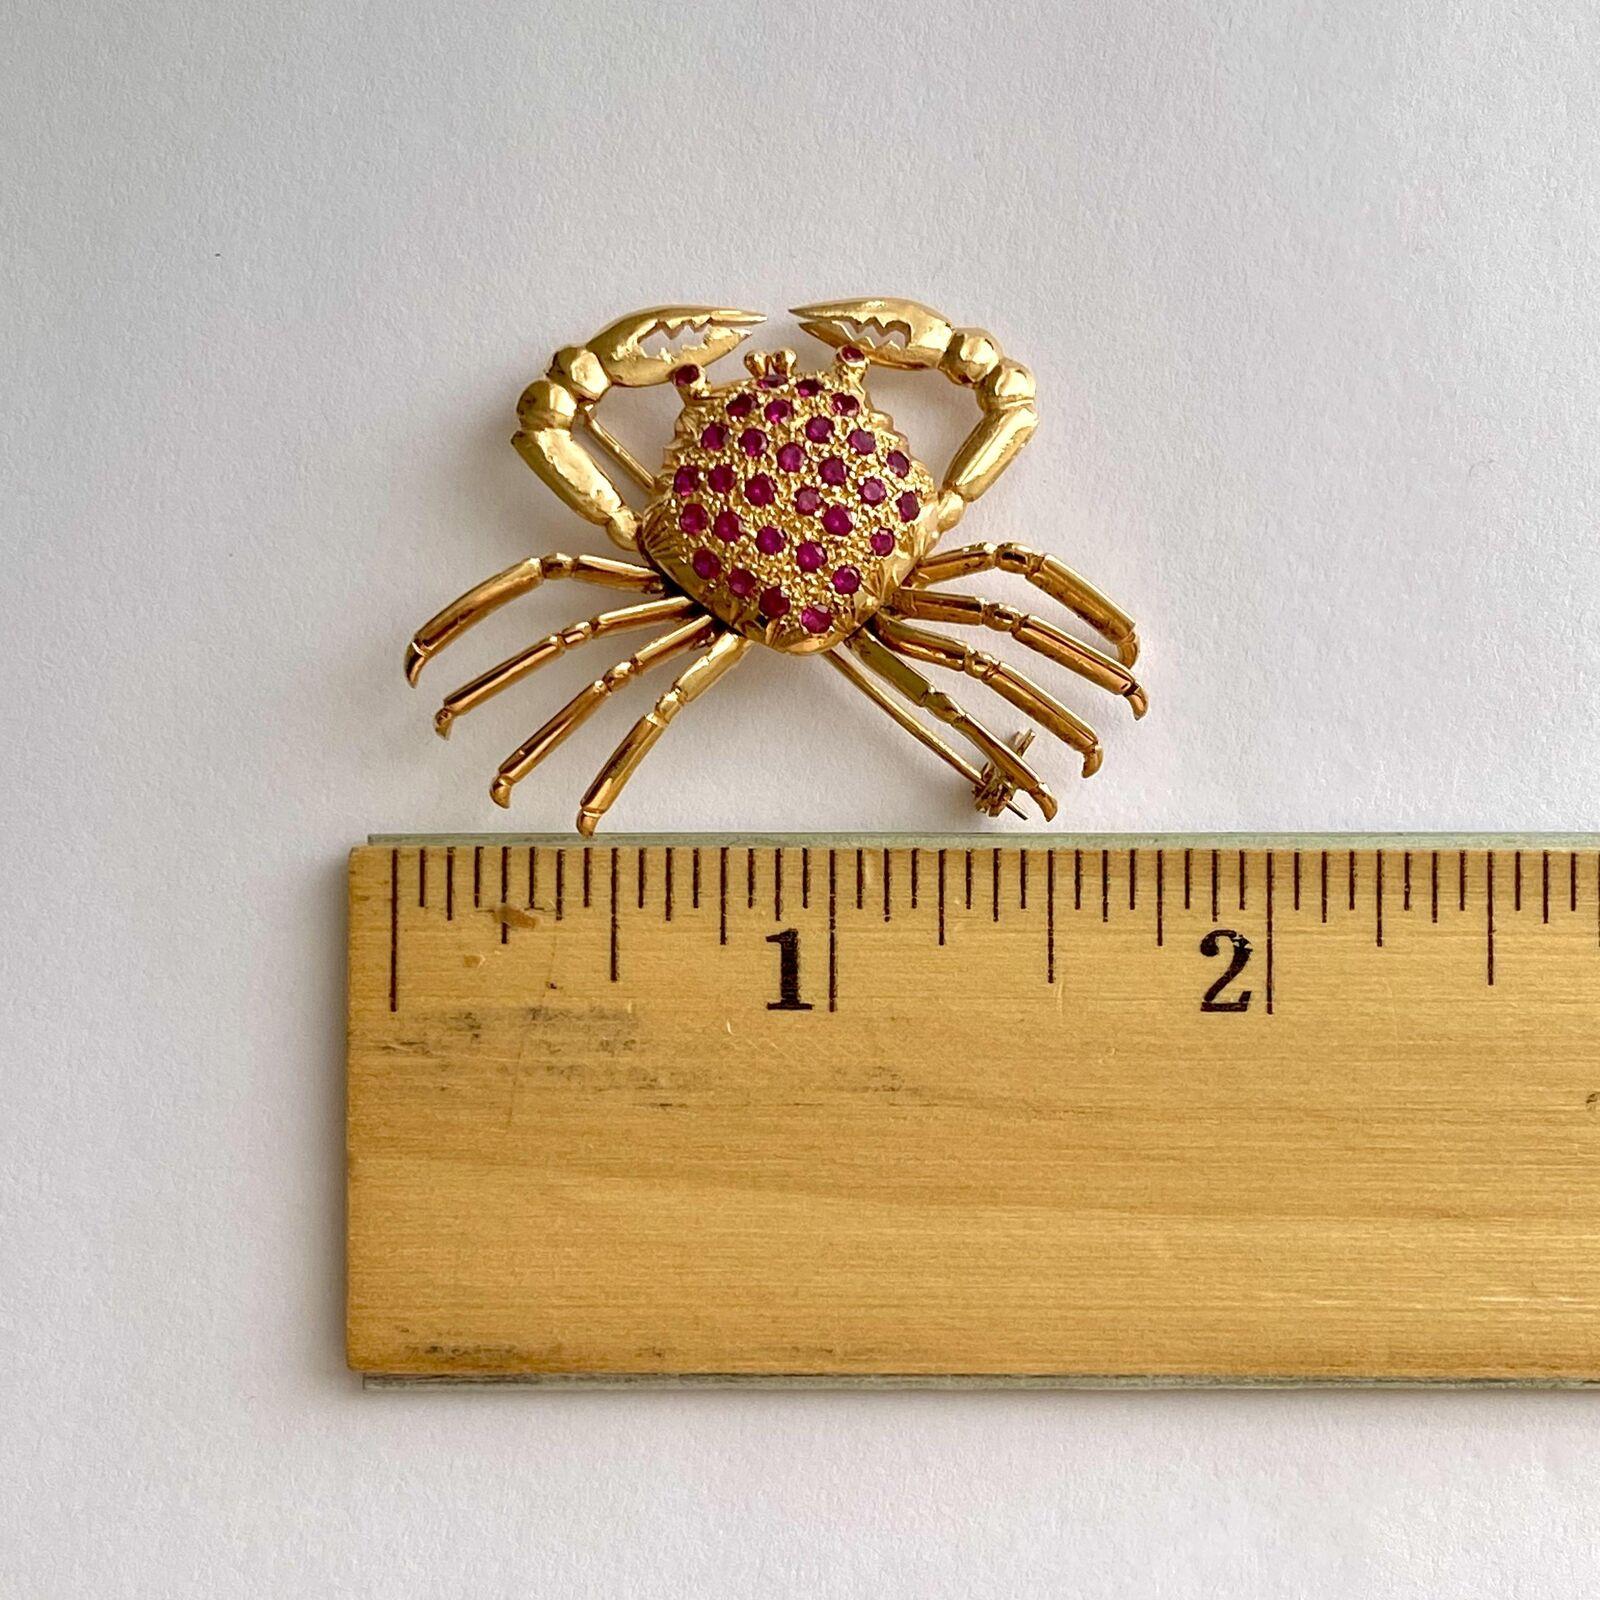 Vintage 18K Yellow Gold Ruby Crab Brooch 9.9G
Specifications:

·        Pre-Owned (Great condition)

·        Metal: 18K Yellow Gold (Au 76.26%)

·        Weight: 9.9Gr

·        Main Stone: Ruby
